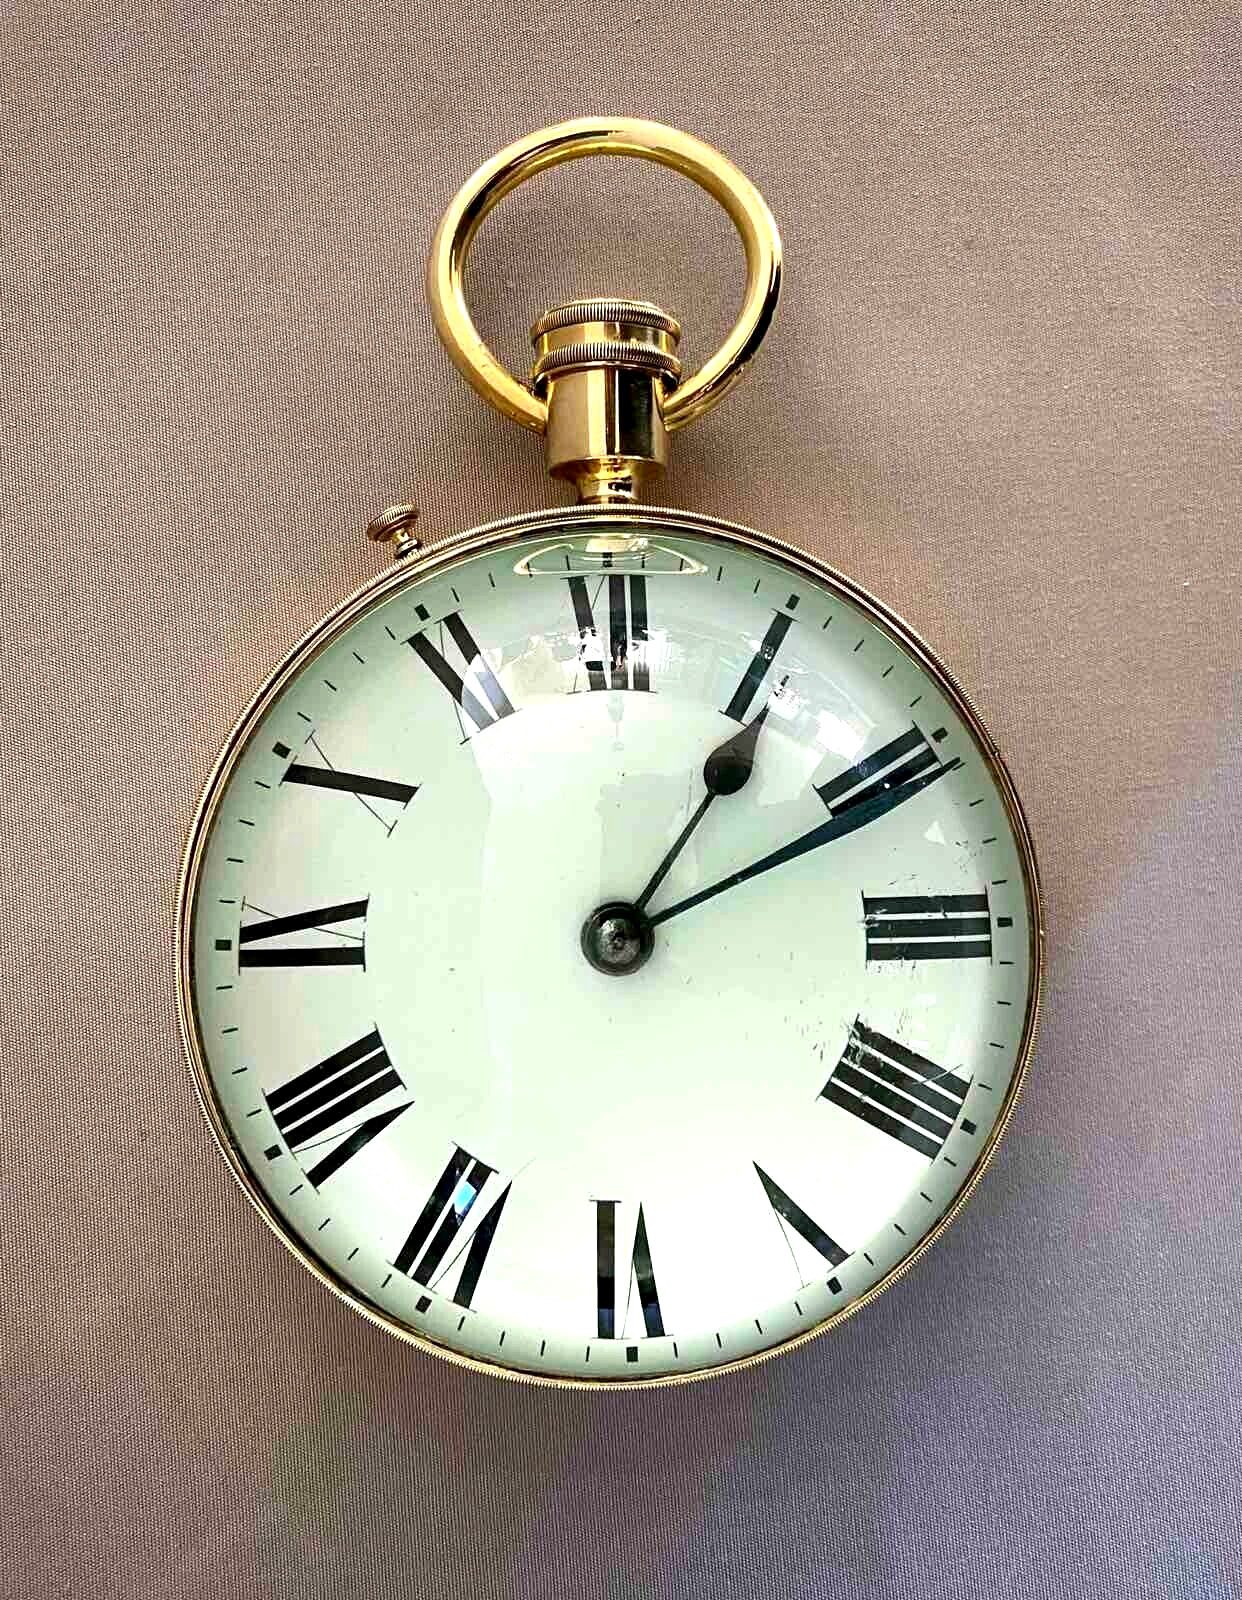 Rare Vintage Extremely Large Ball Magnifying Glass Clock with Roman Numerals